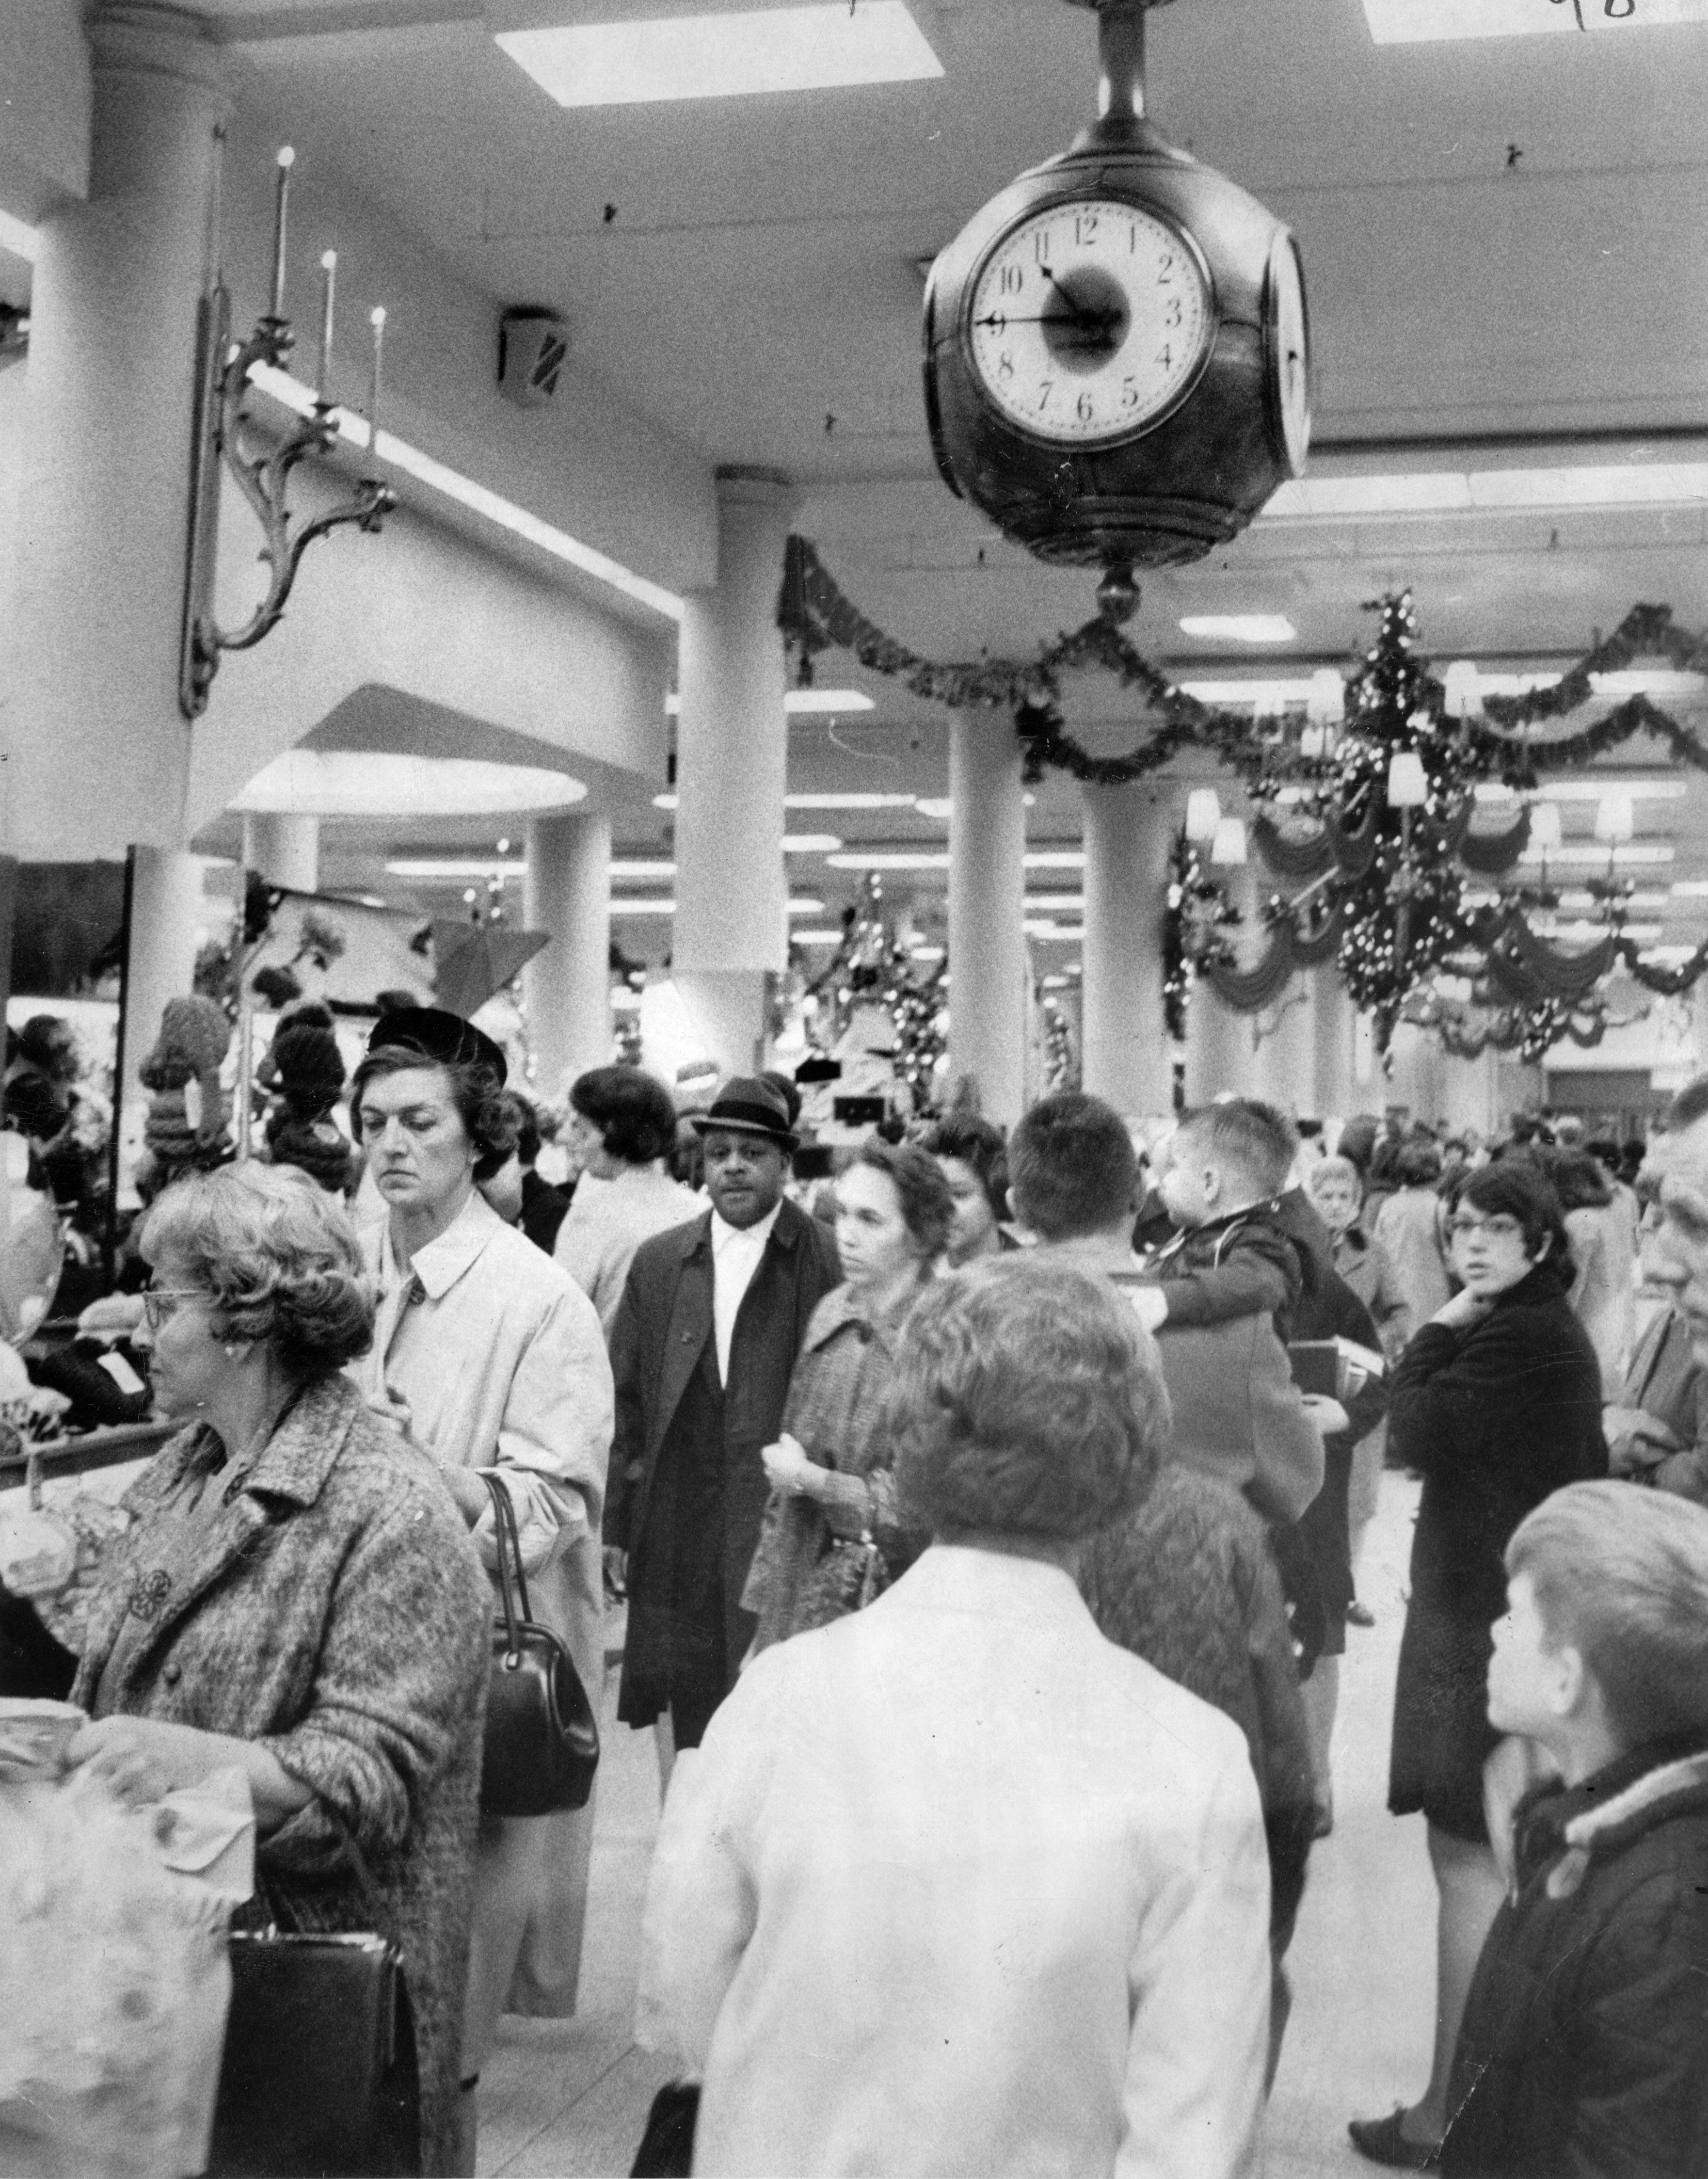 Christmas shoppers crowd the aisles under the clock in Sibley's on Nov. 25, 1966.